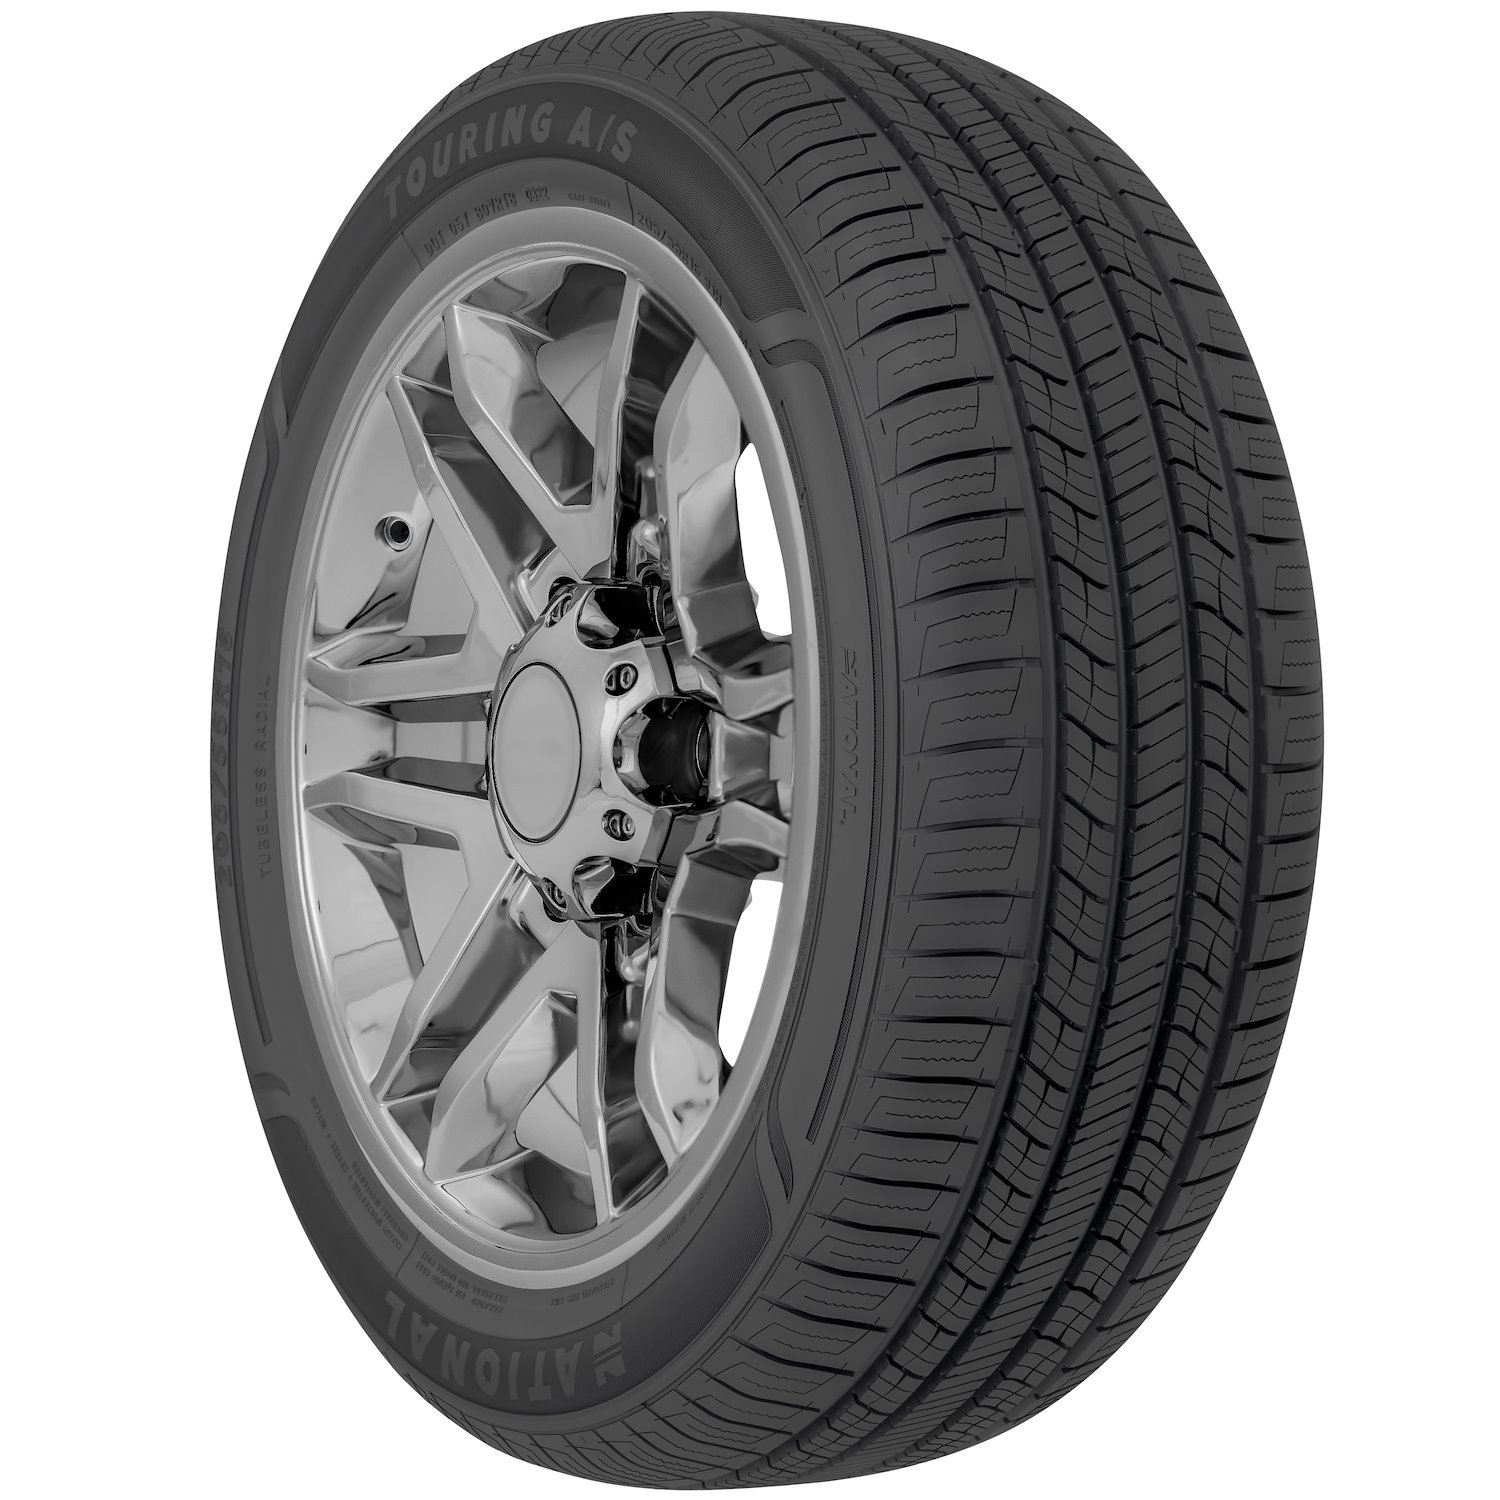 NLR90 Touring A/S Tire, 205/50R17